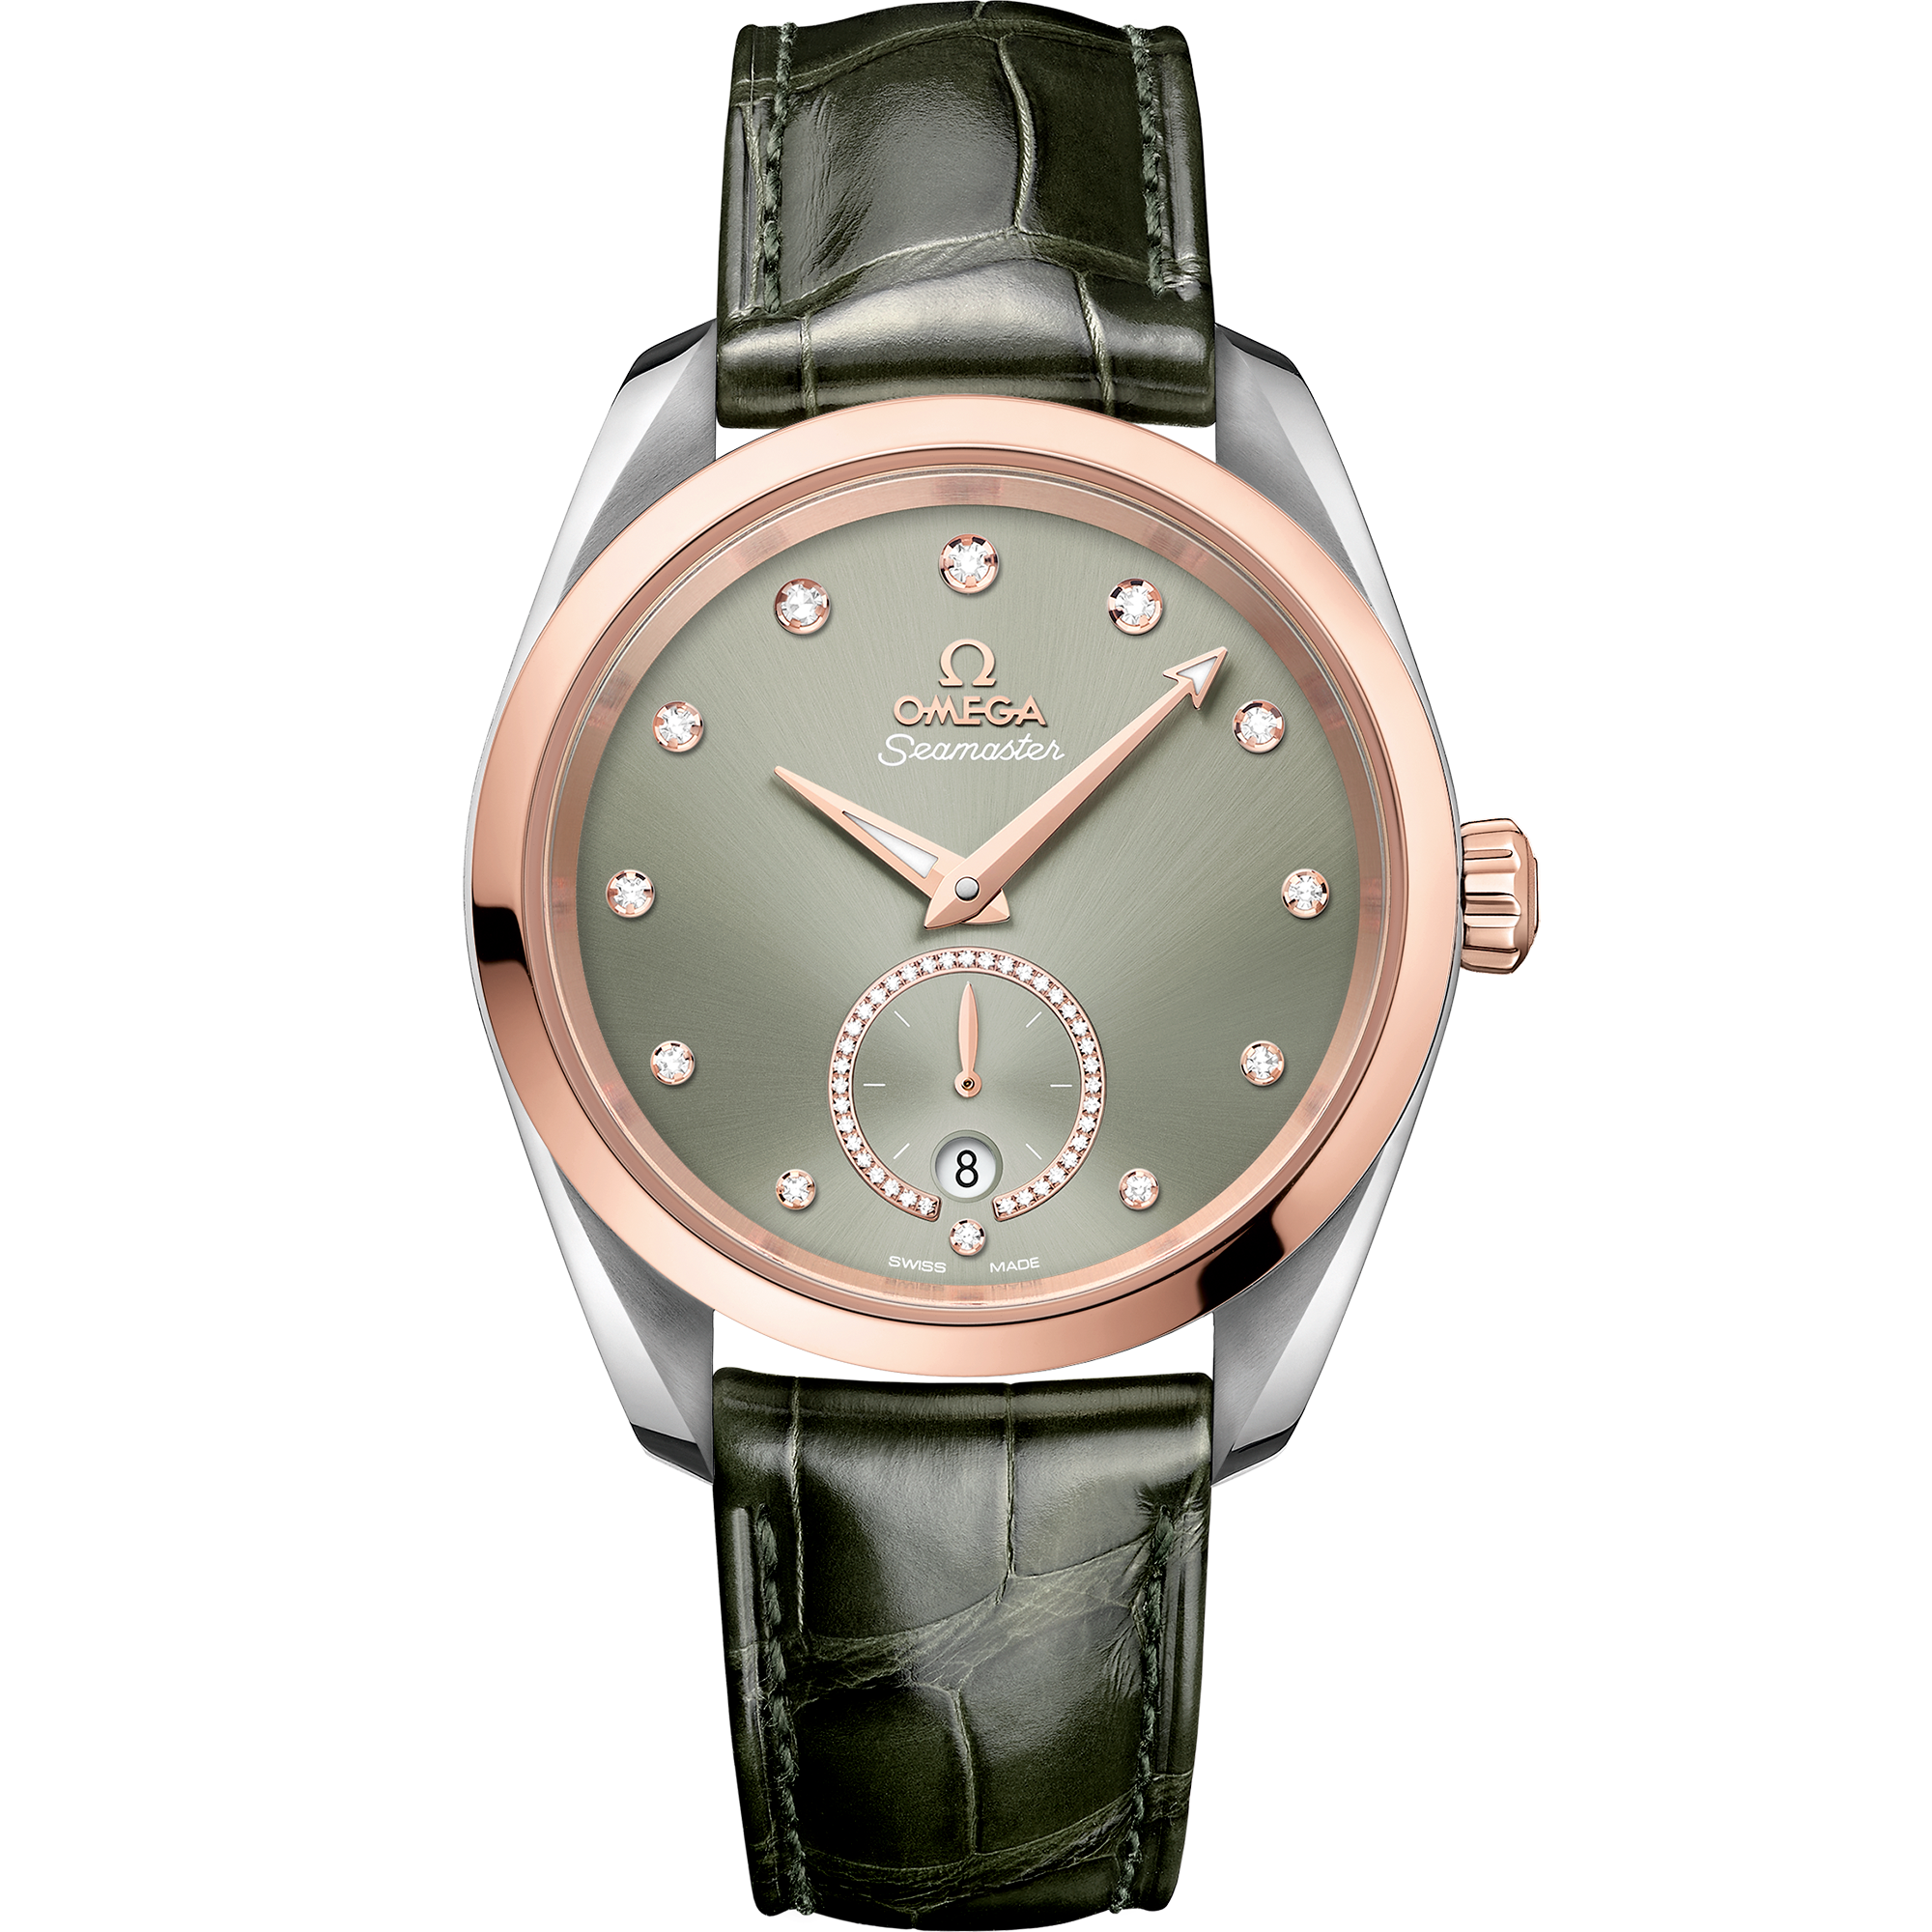 Seamaster 38 mm, steel - Sedna™ gold on leather strap - 220.23.38.20.60.001